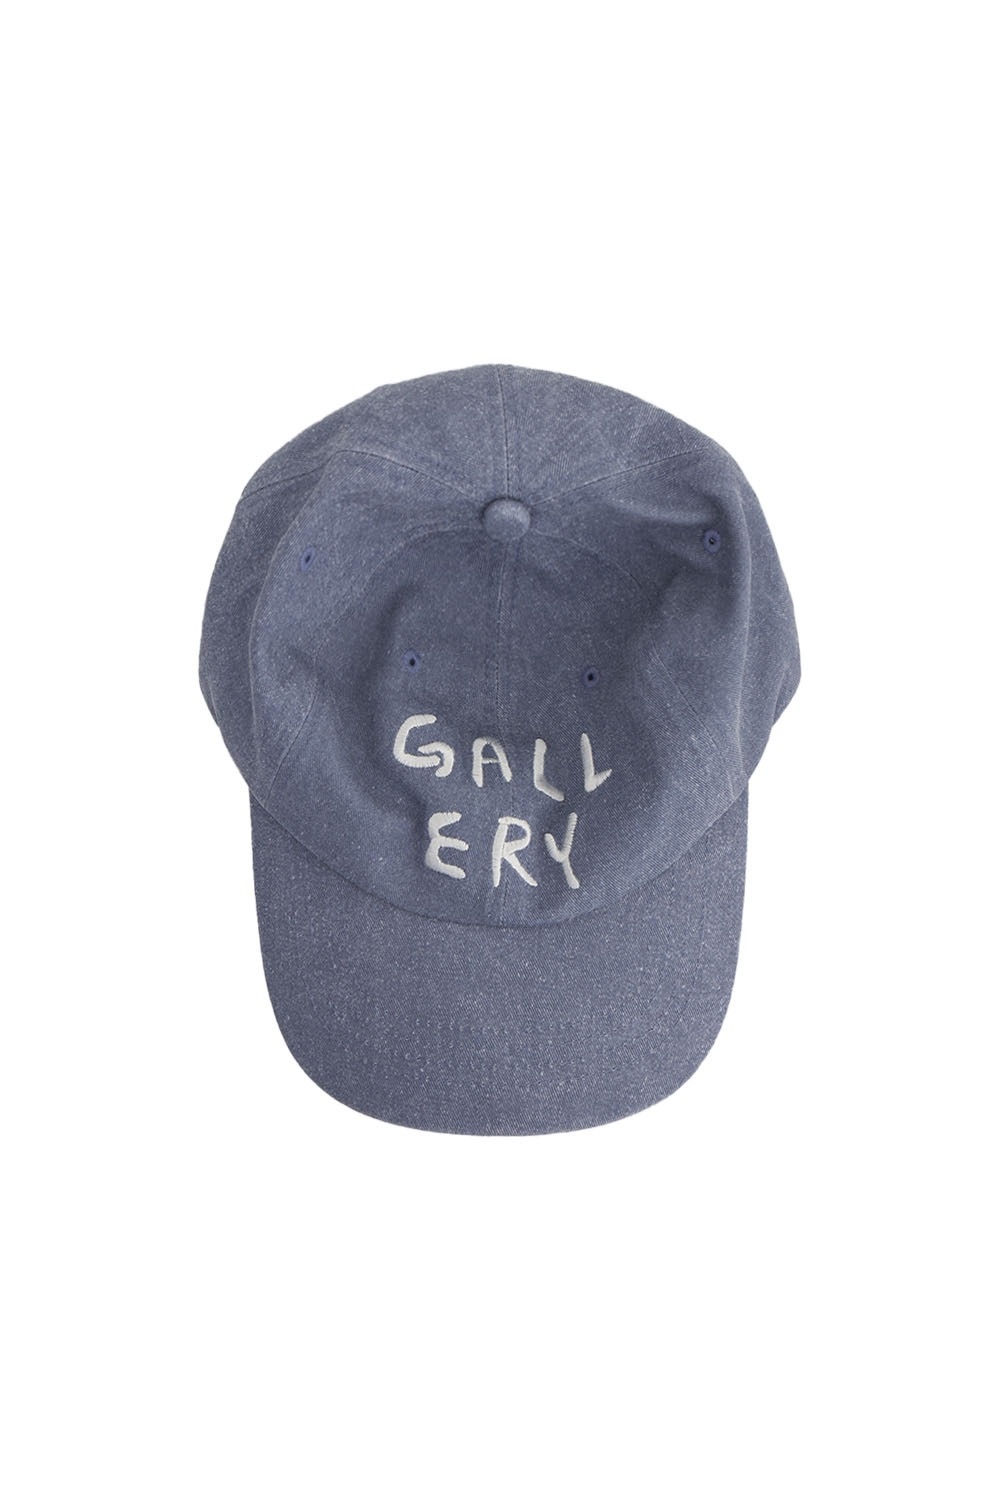 Gallery Pigment Ball Cap - Washed Blue